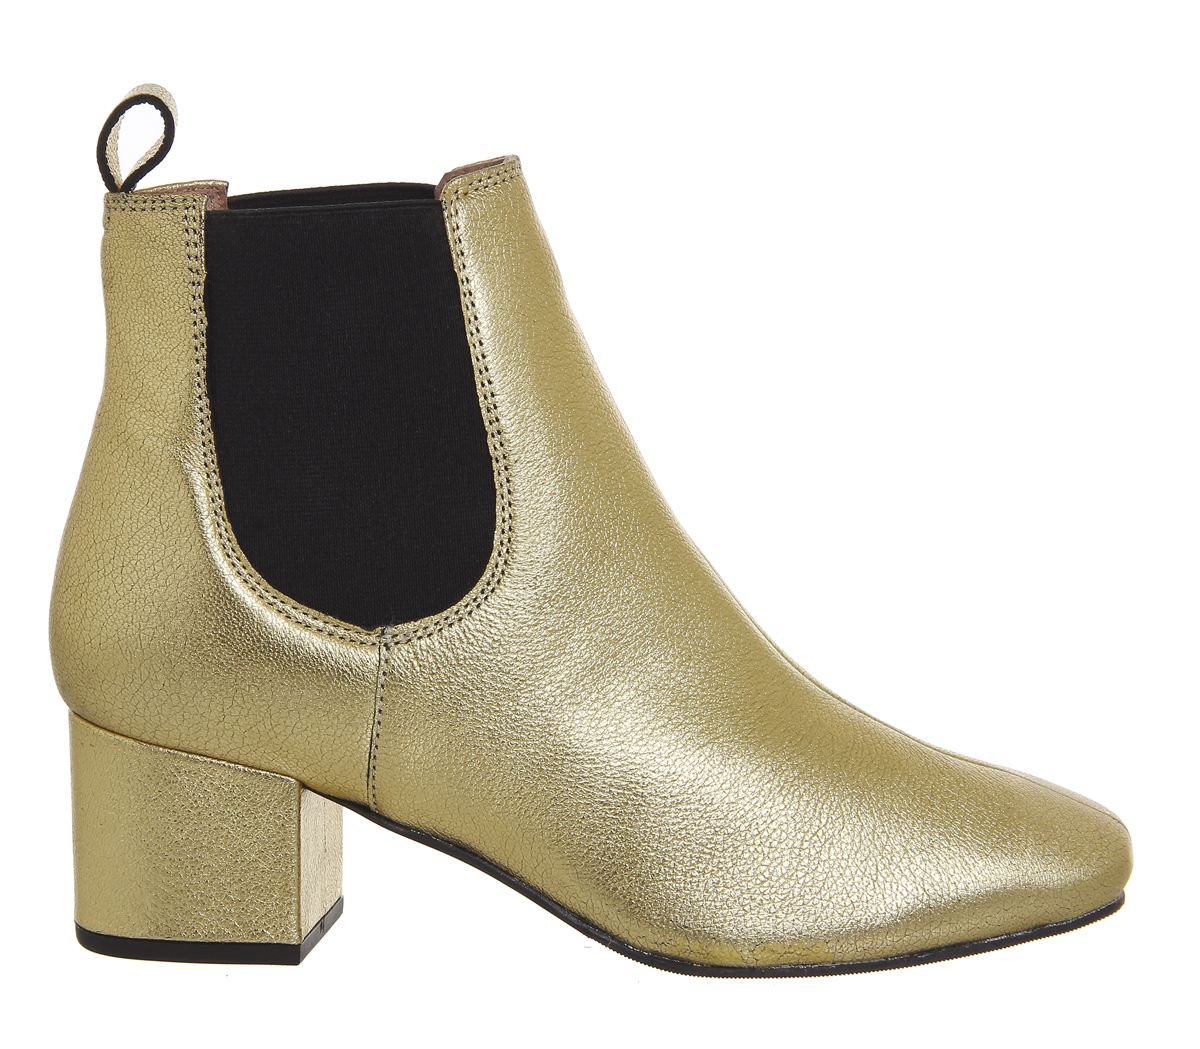 OFFICE Love Bug Block Heel Chelsea Boots Gold Leather - Women's Ankle Boots